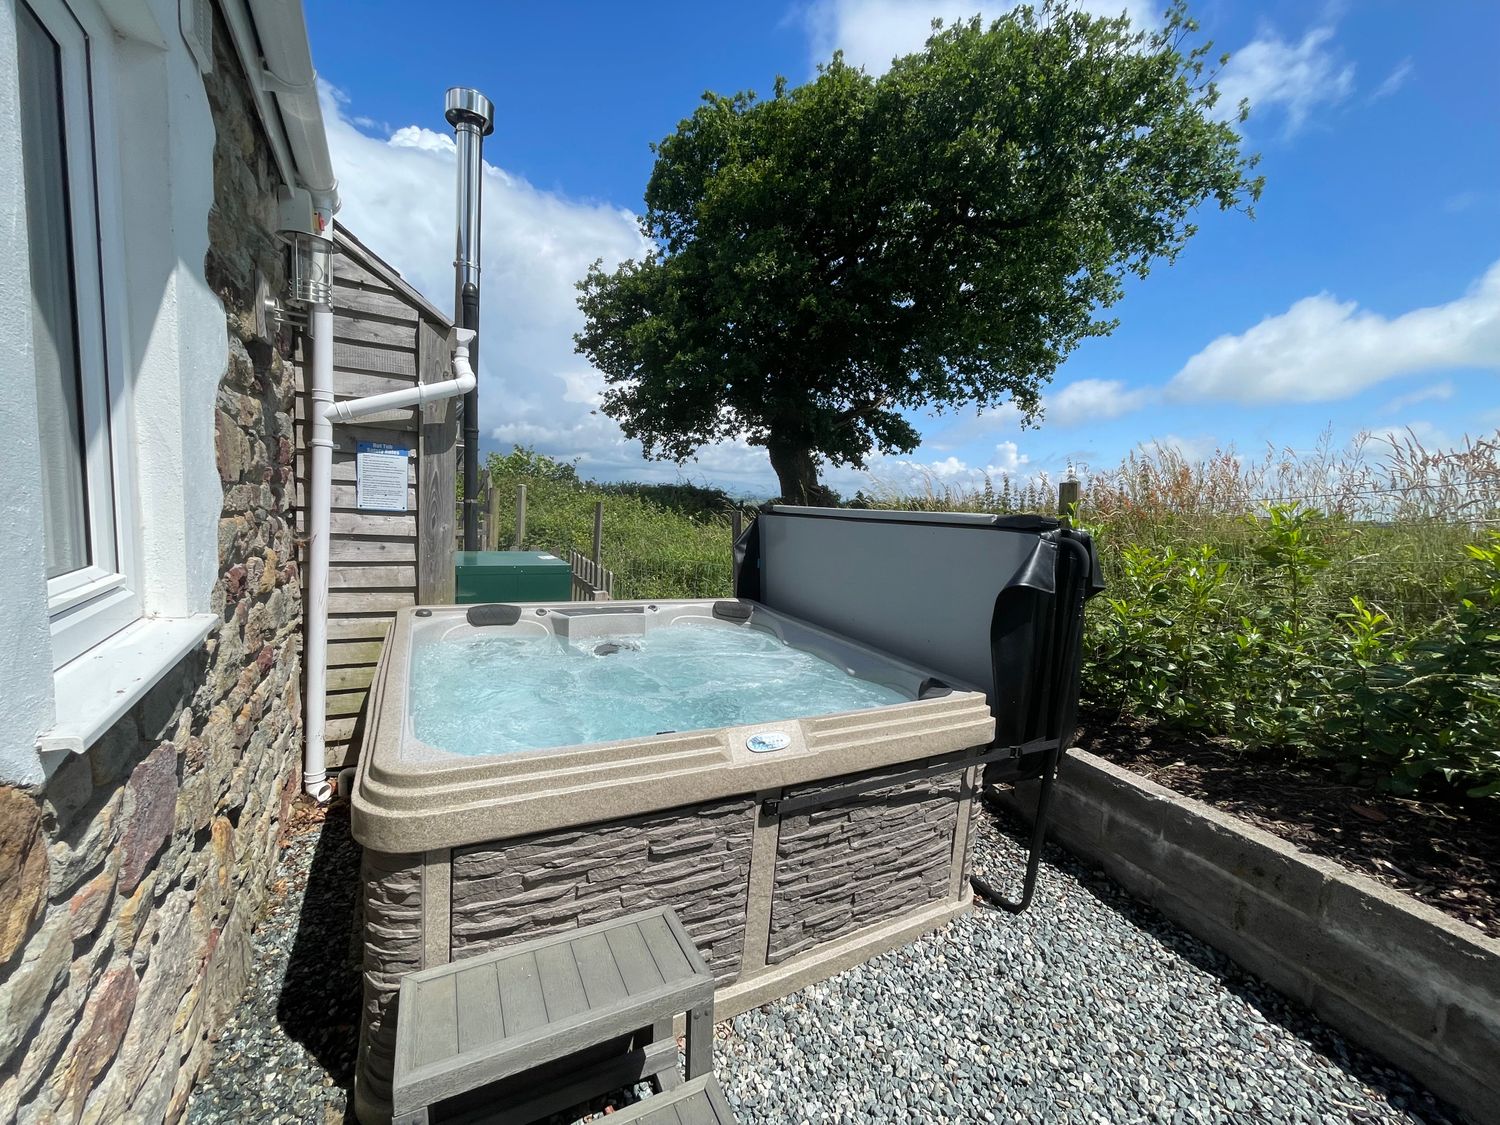 Dairy Cottage in Tavernspite near Whitland, Pembrokeshire, hot tub, dog-friendly, off-road parking. 